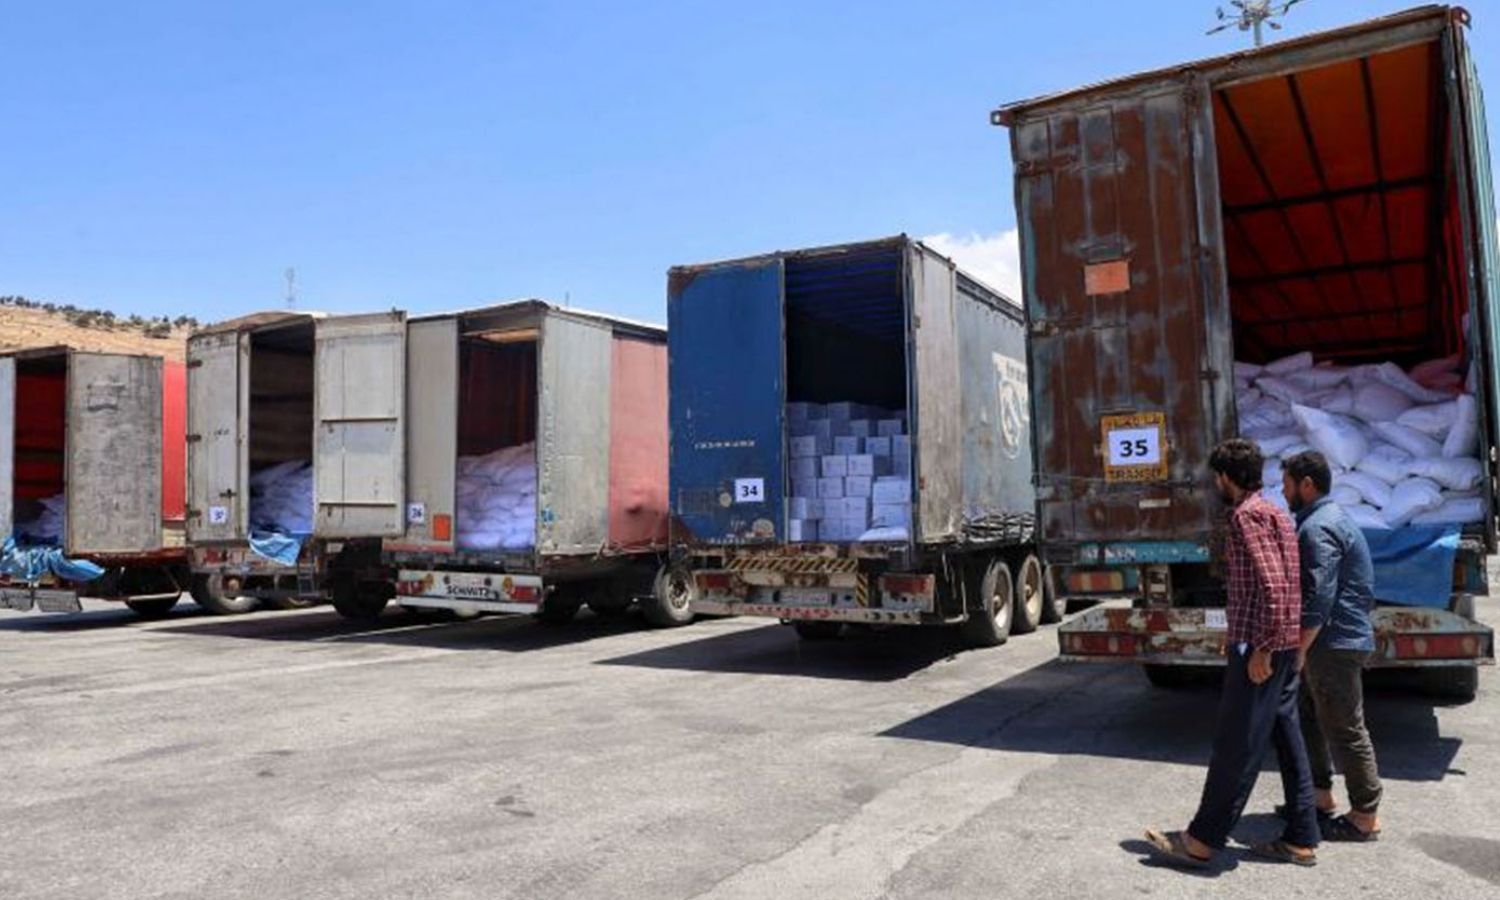 Workers unloading a United Nations aid convoy truck after it entered Syria through the Bab al-Hawa border crossing with Turkey - 28 July 2022 (Omar Haj Kadour - AFP)